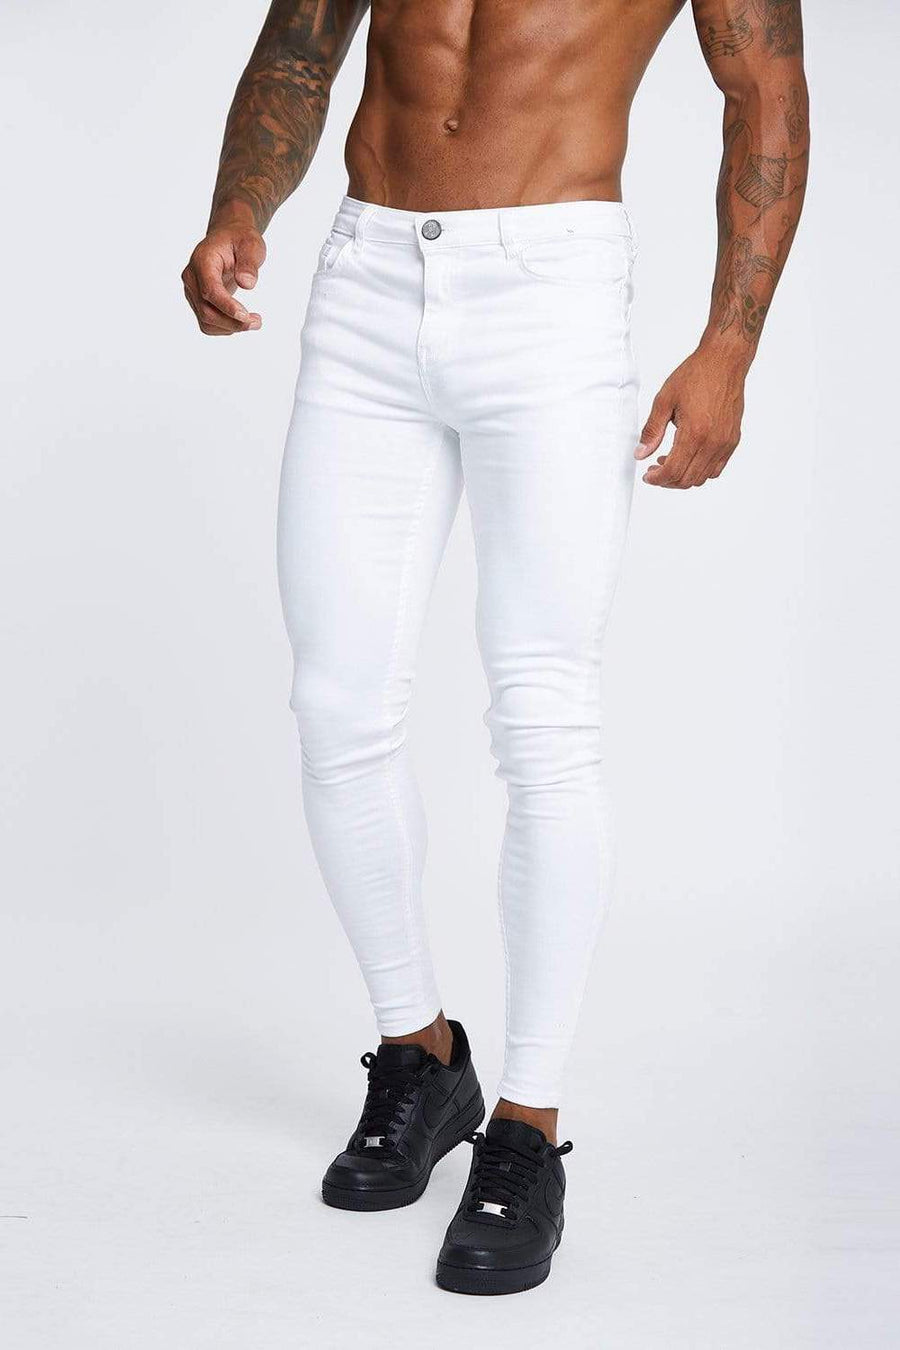 Legend London Jeans White – Non-Ripped Jeans